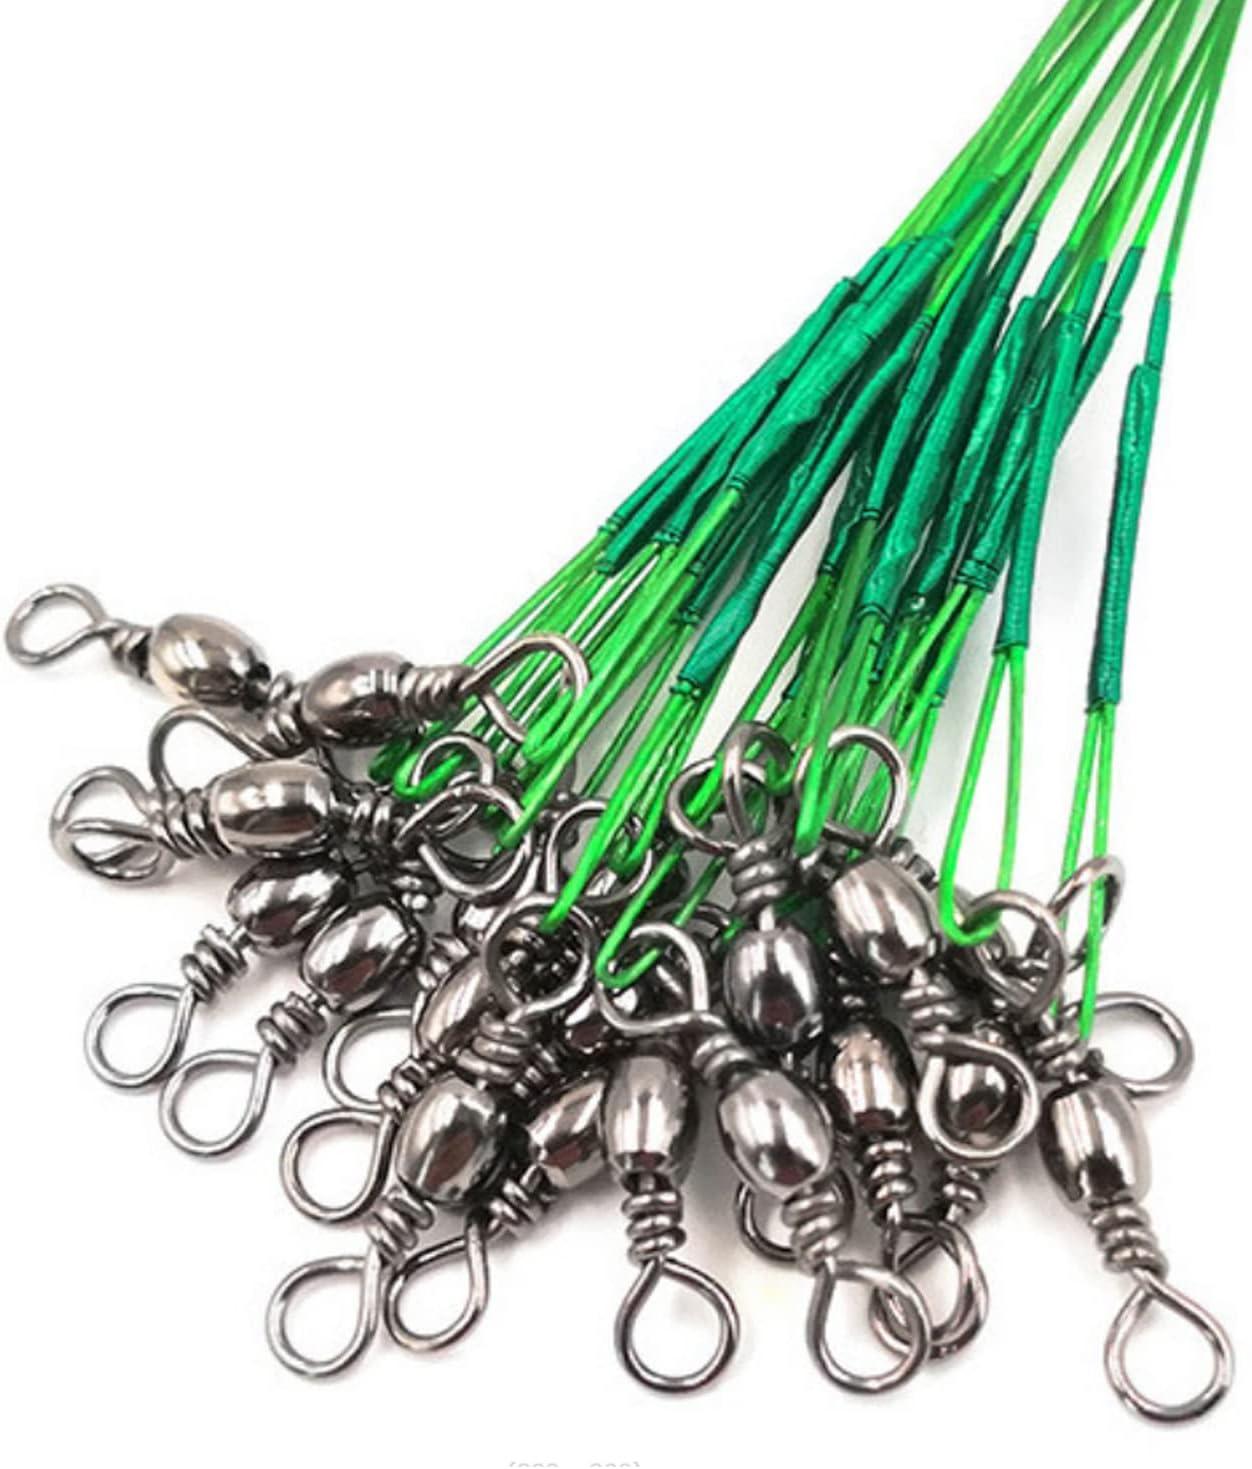 JSHANMEI 12PCS Fising Leader Wire Stainless Steel Fishing Rigs Wire Leader  Rigging Fishing Line Swivel String Hooks Balance Bracket Fishing Tackle